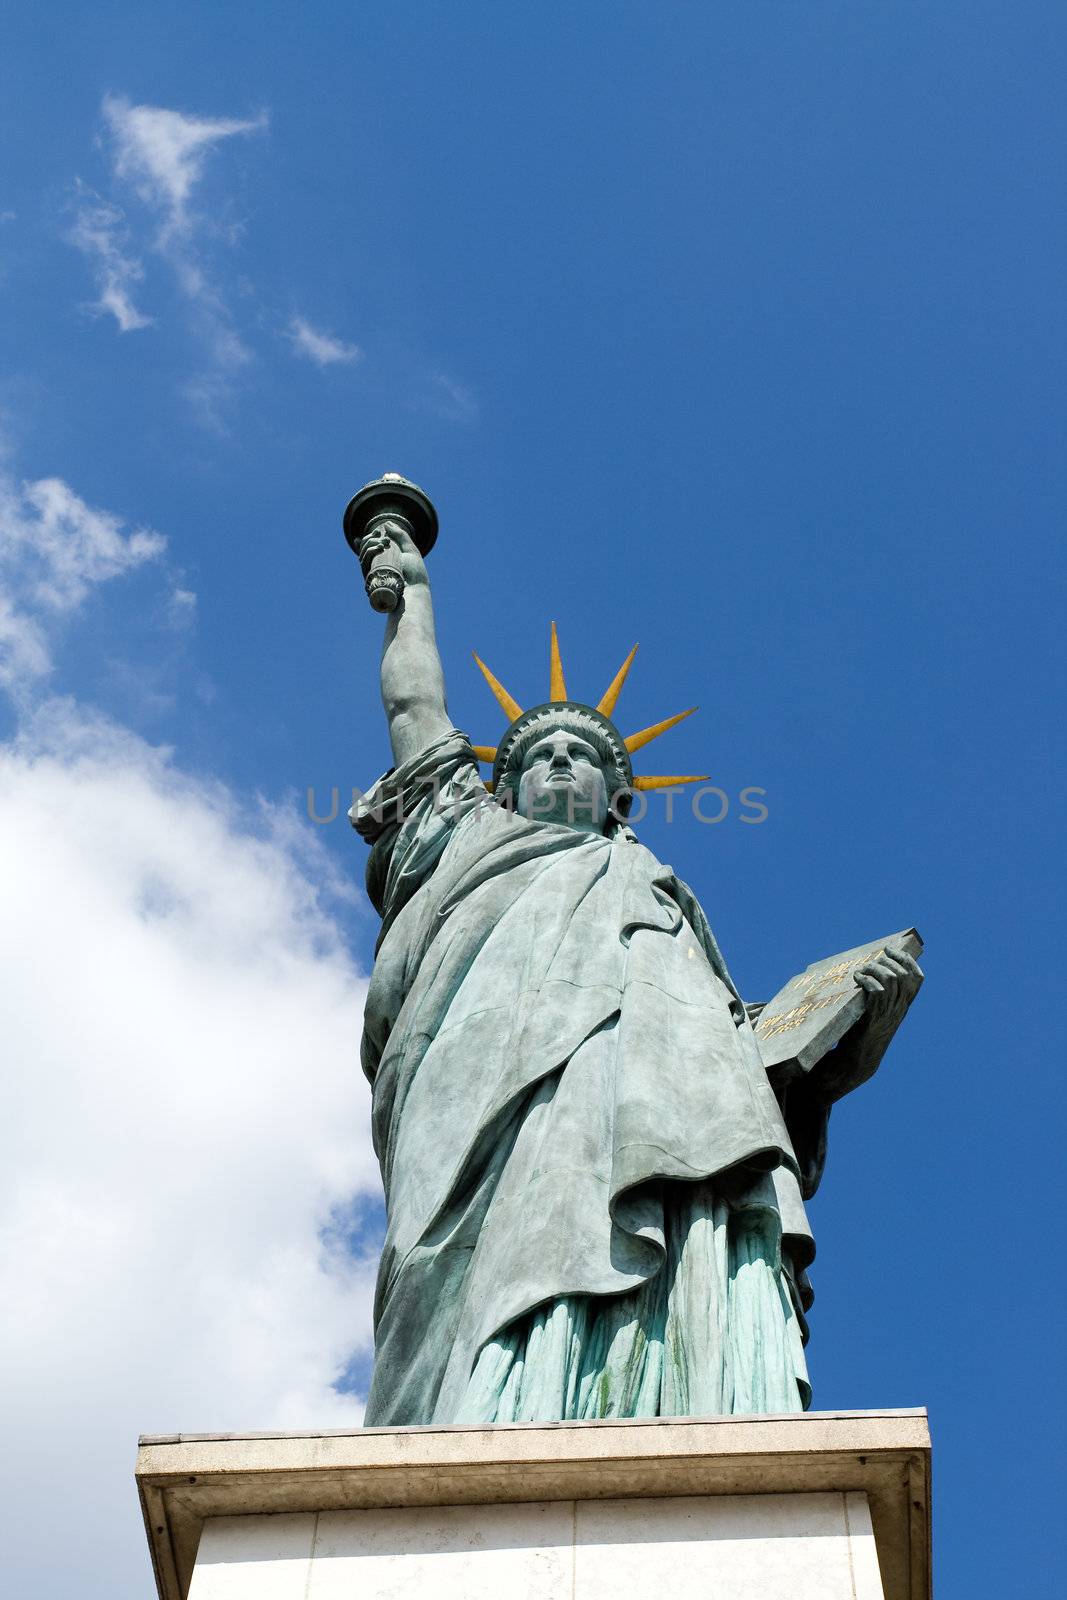 Statue of Liberty in Paris � smaller sister of famous New York statue